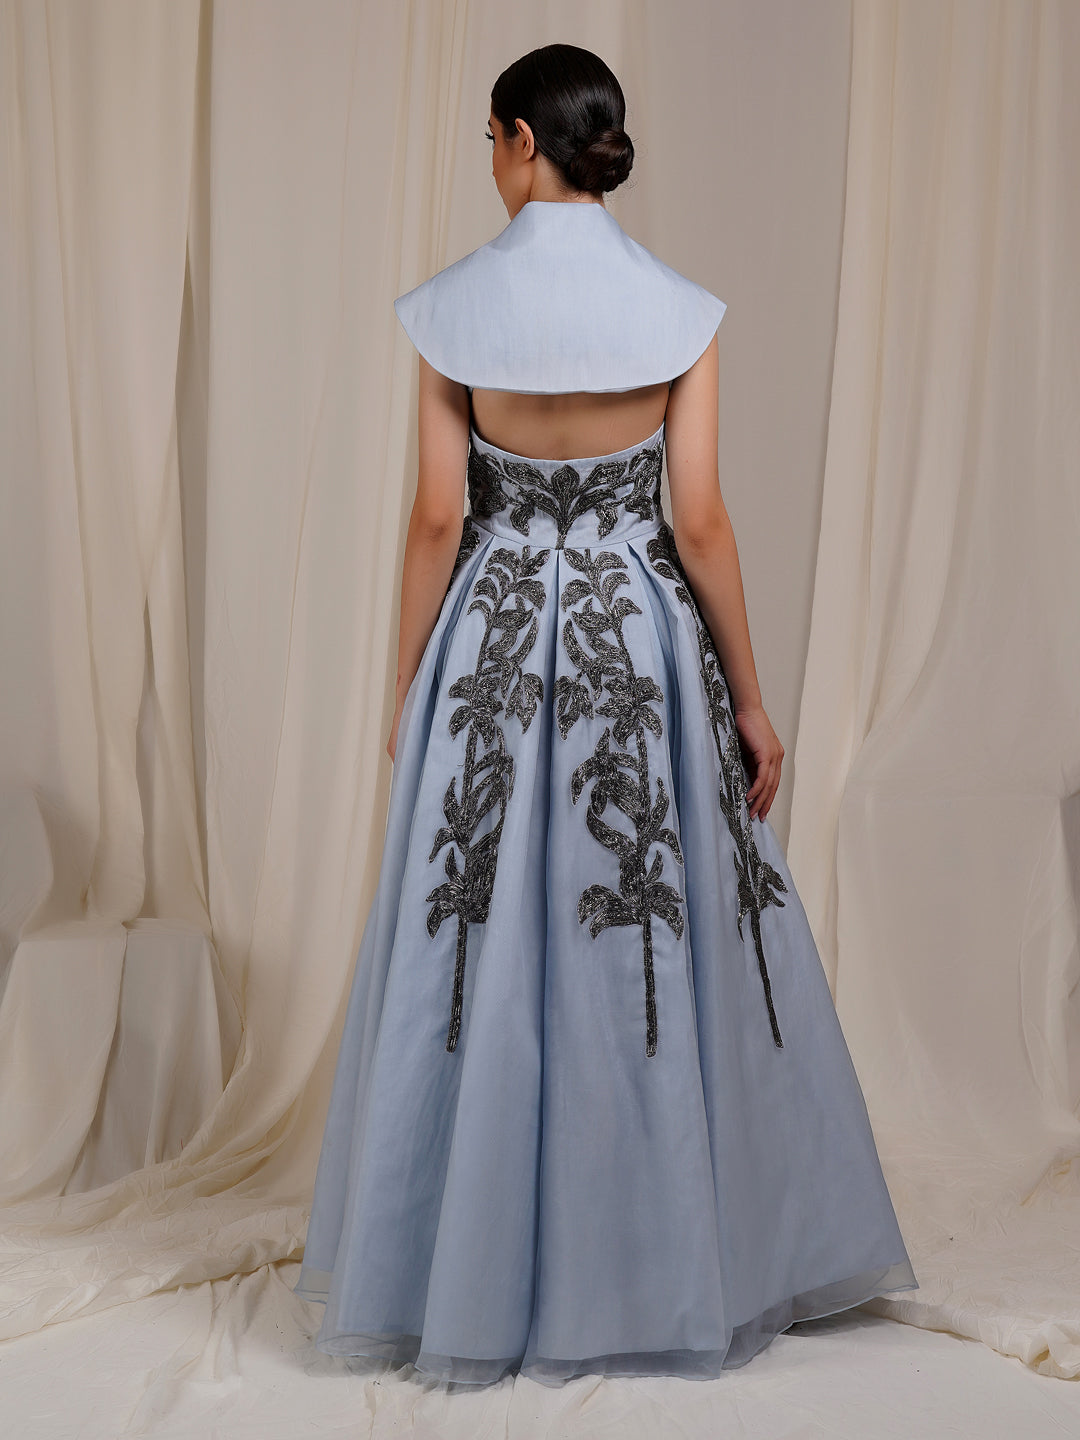 A ice blue organza  silk Floor-Length Dress That Has A Plunging V-Neck